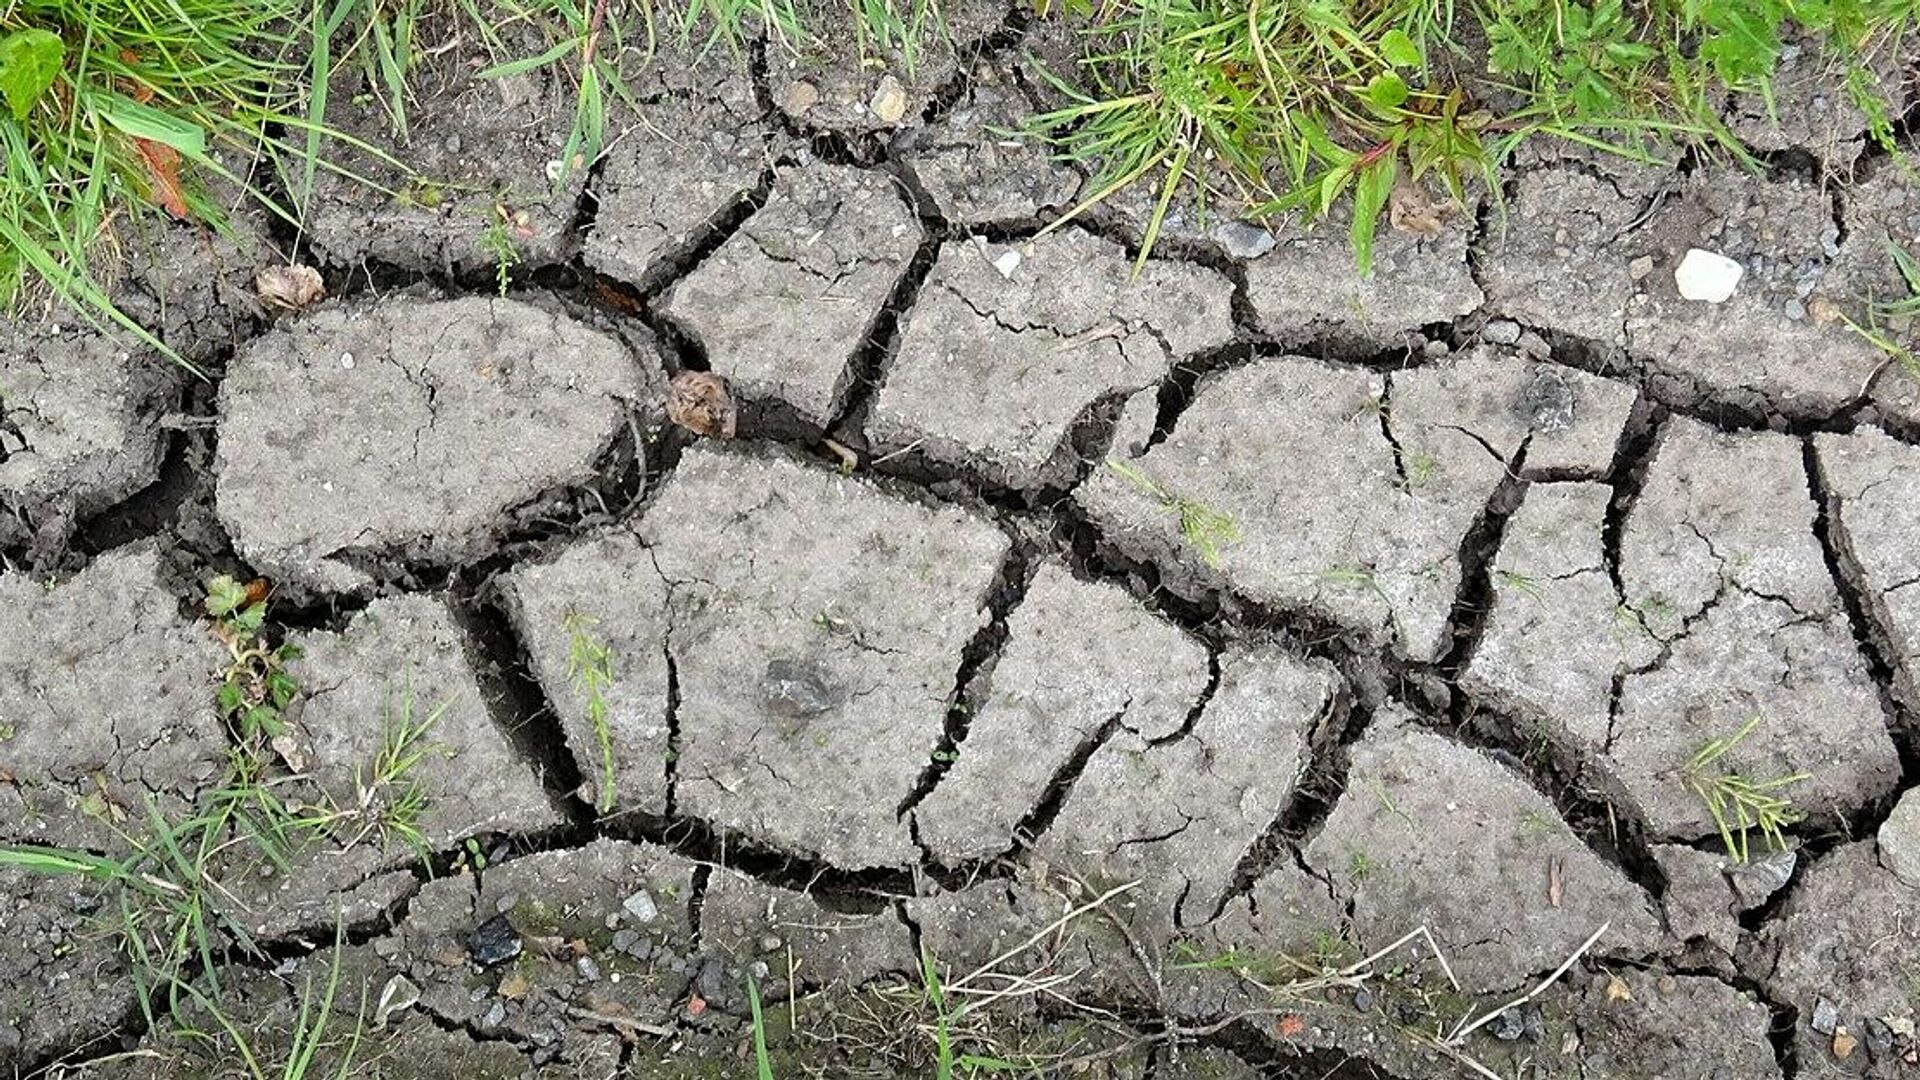 Cracked earth in a ditch after prolonged drought. 2020. Kilmaurs parish - Sputnik International, 1920, 25.03.2022